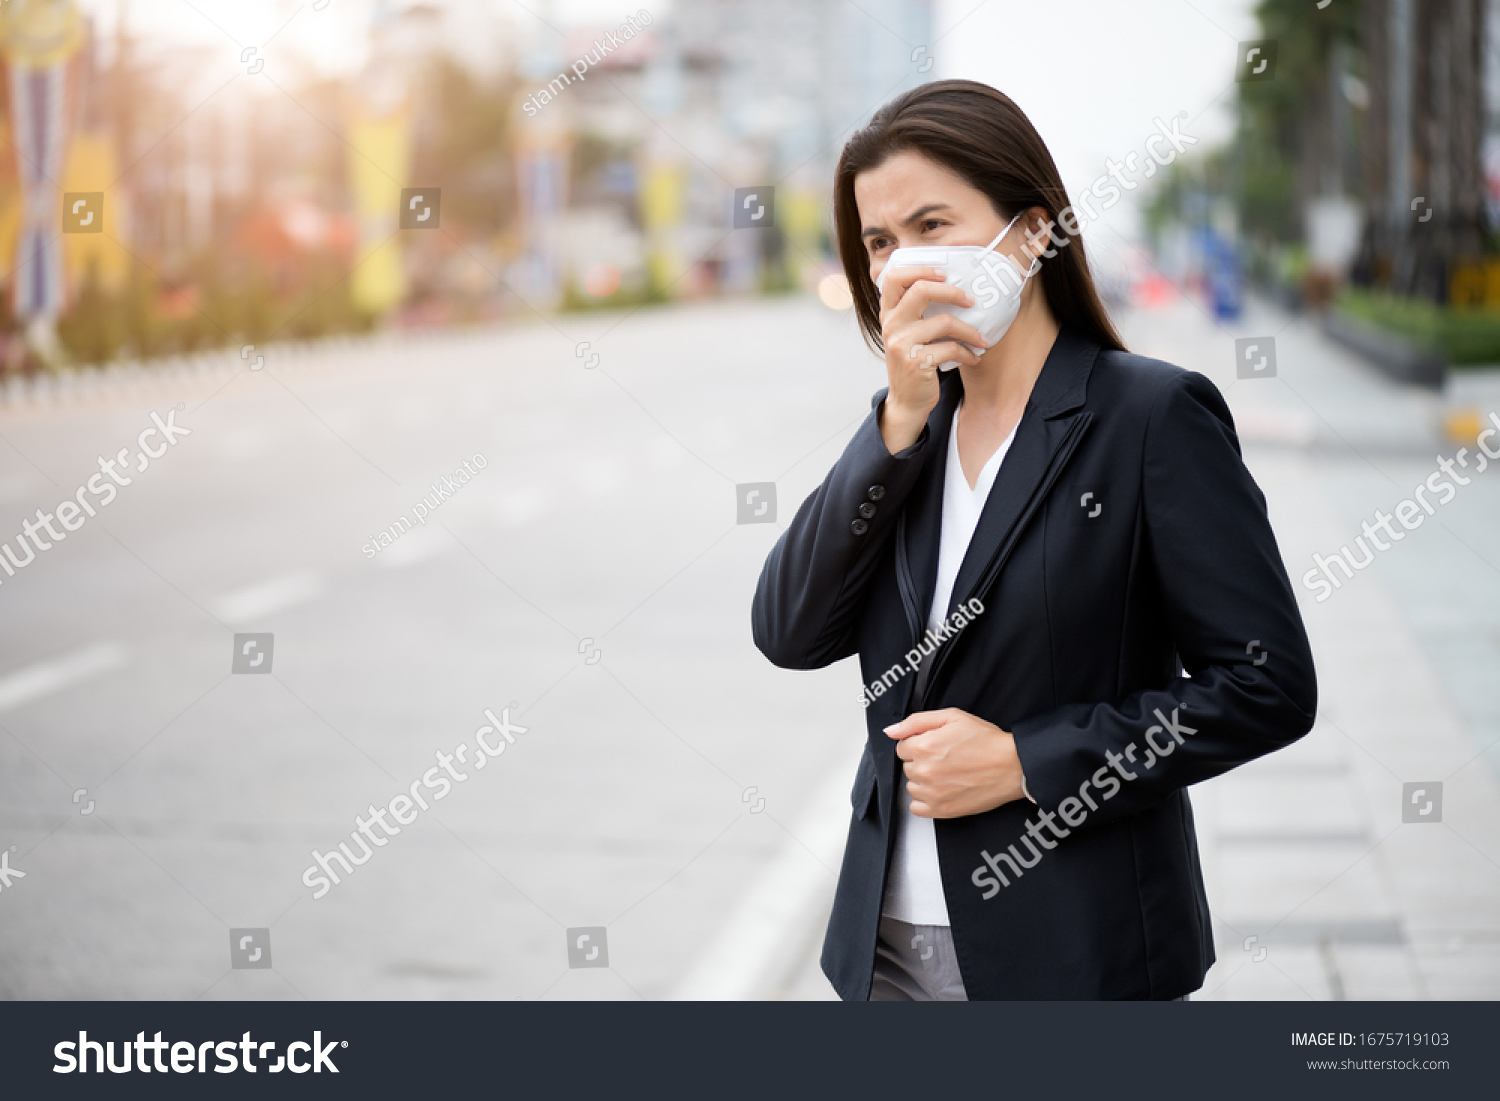 Close up of a businesswoman in a suit wearing Protective face mask and cough, get ready for Coronavirus and pm 2.5 fighting against beside road in background. #1675719103